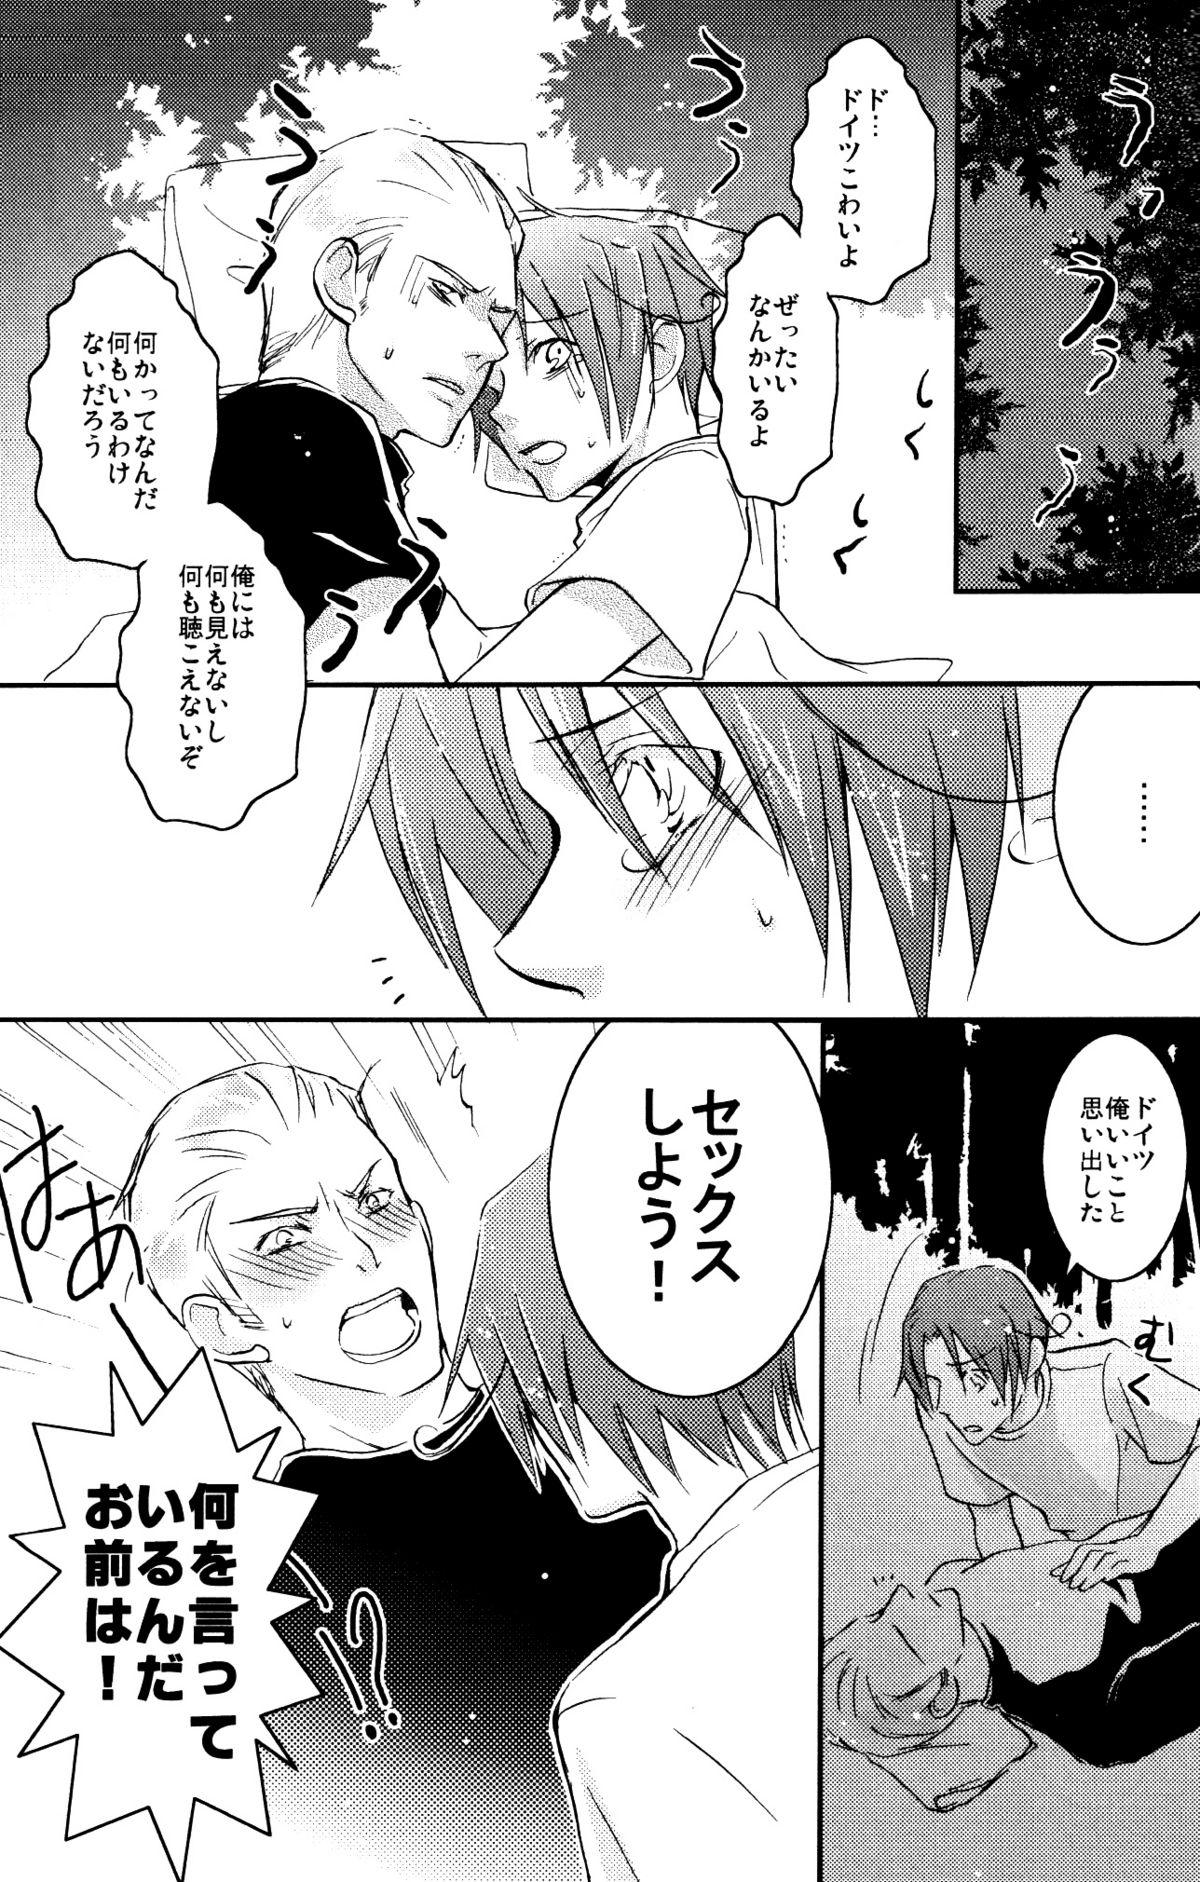 Gay Trimmed STAMP Vol. 3 - Axis powers hetalia Masterbation - Page 2